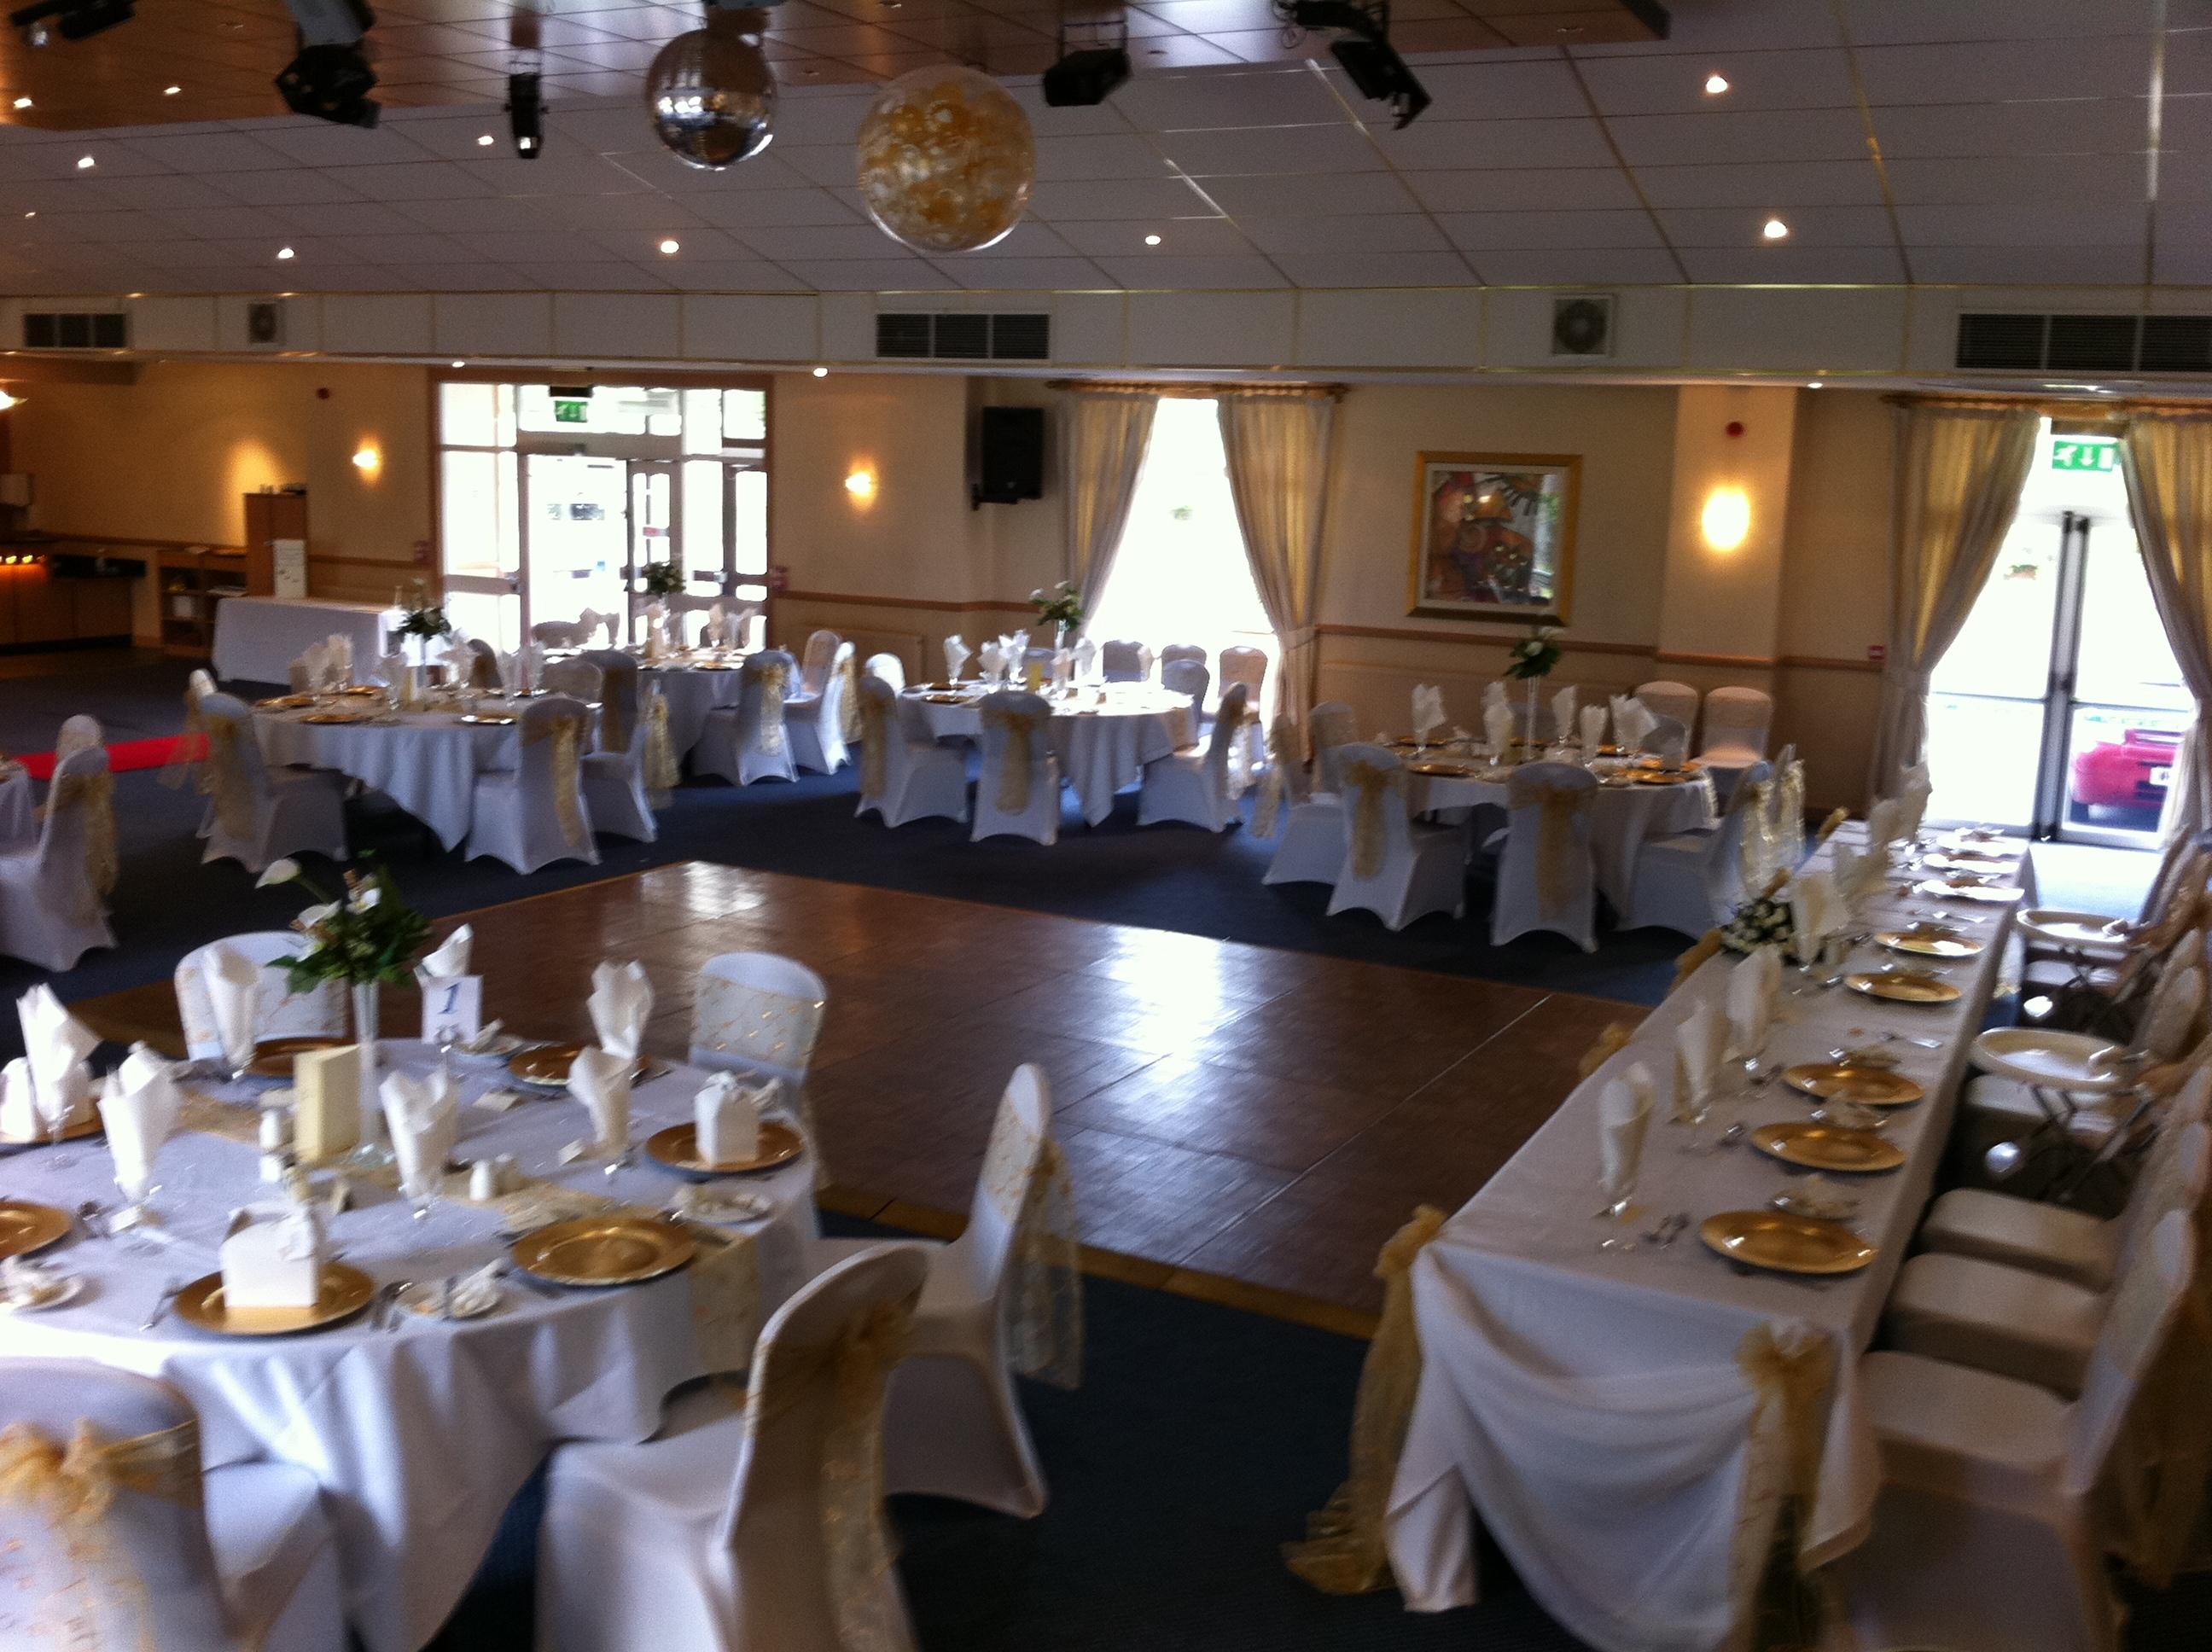 The Fairway And Bluebell Banqueting Suite, Bluebell Banqueting Suite photo #0